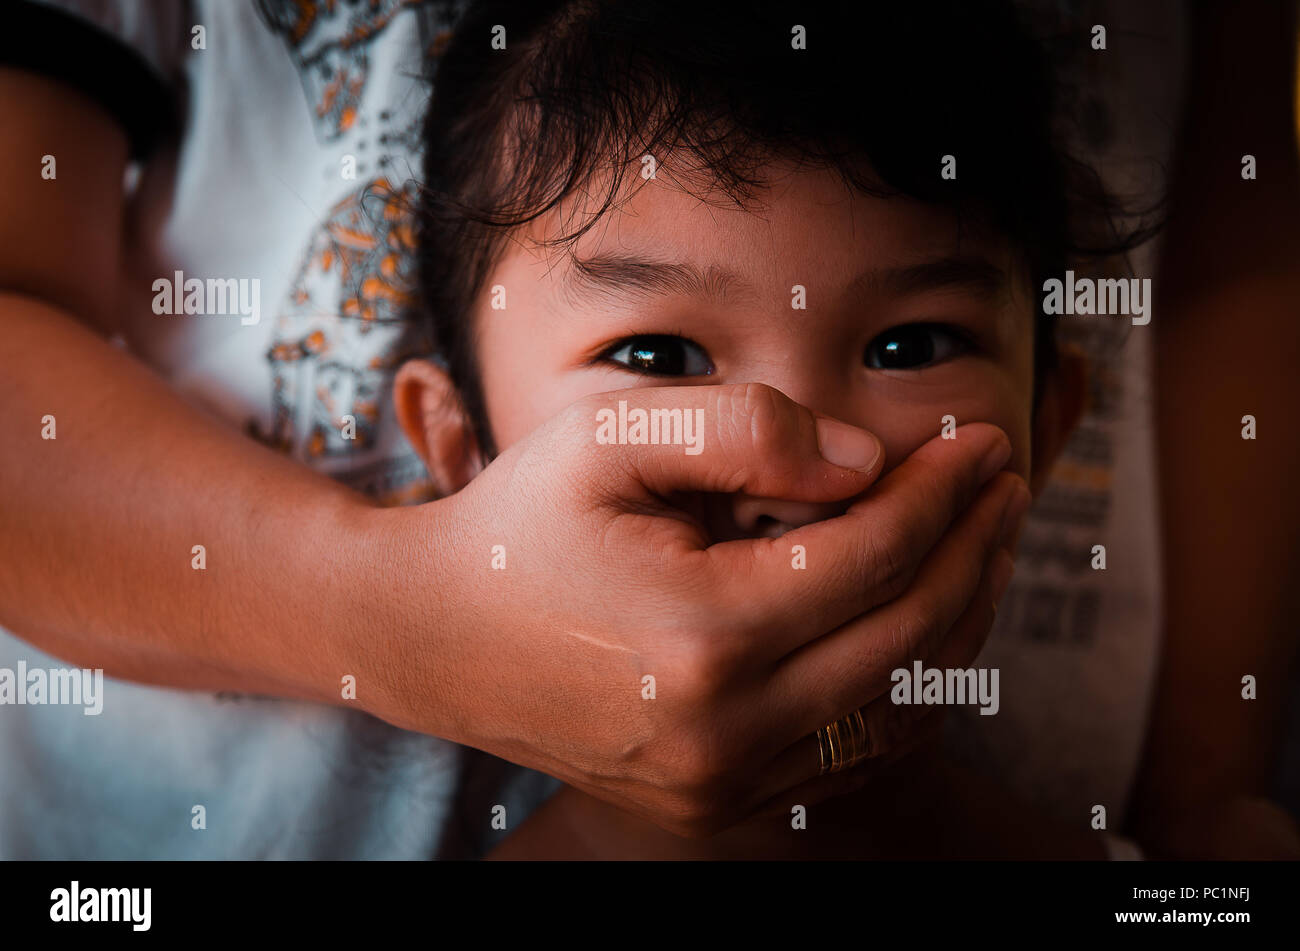 Conceptual image of child abuse with an adult's hand covering the girl's mouth. Stock Photo